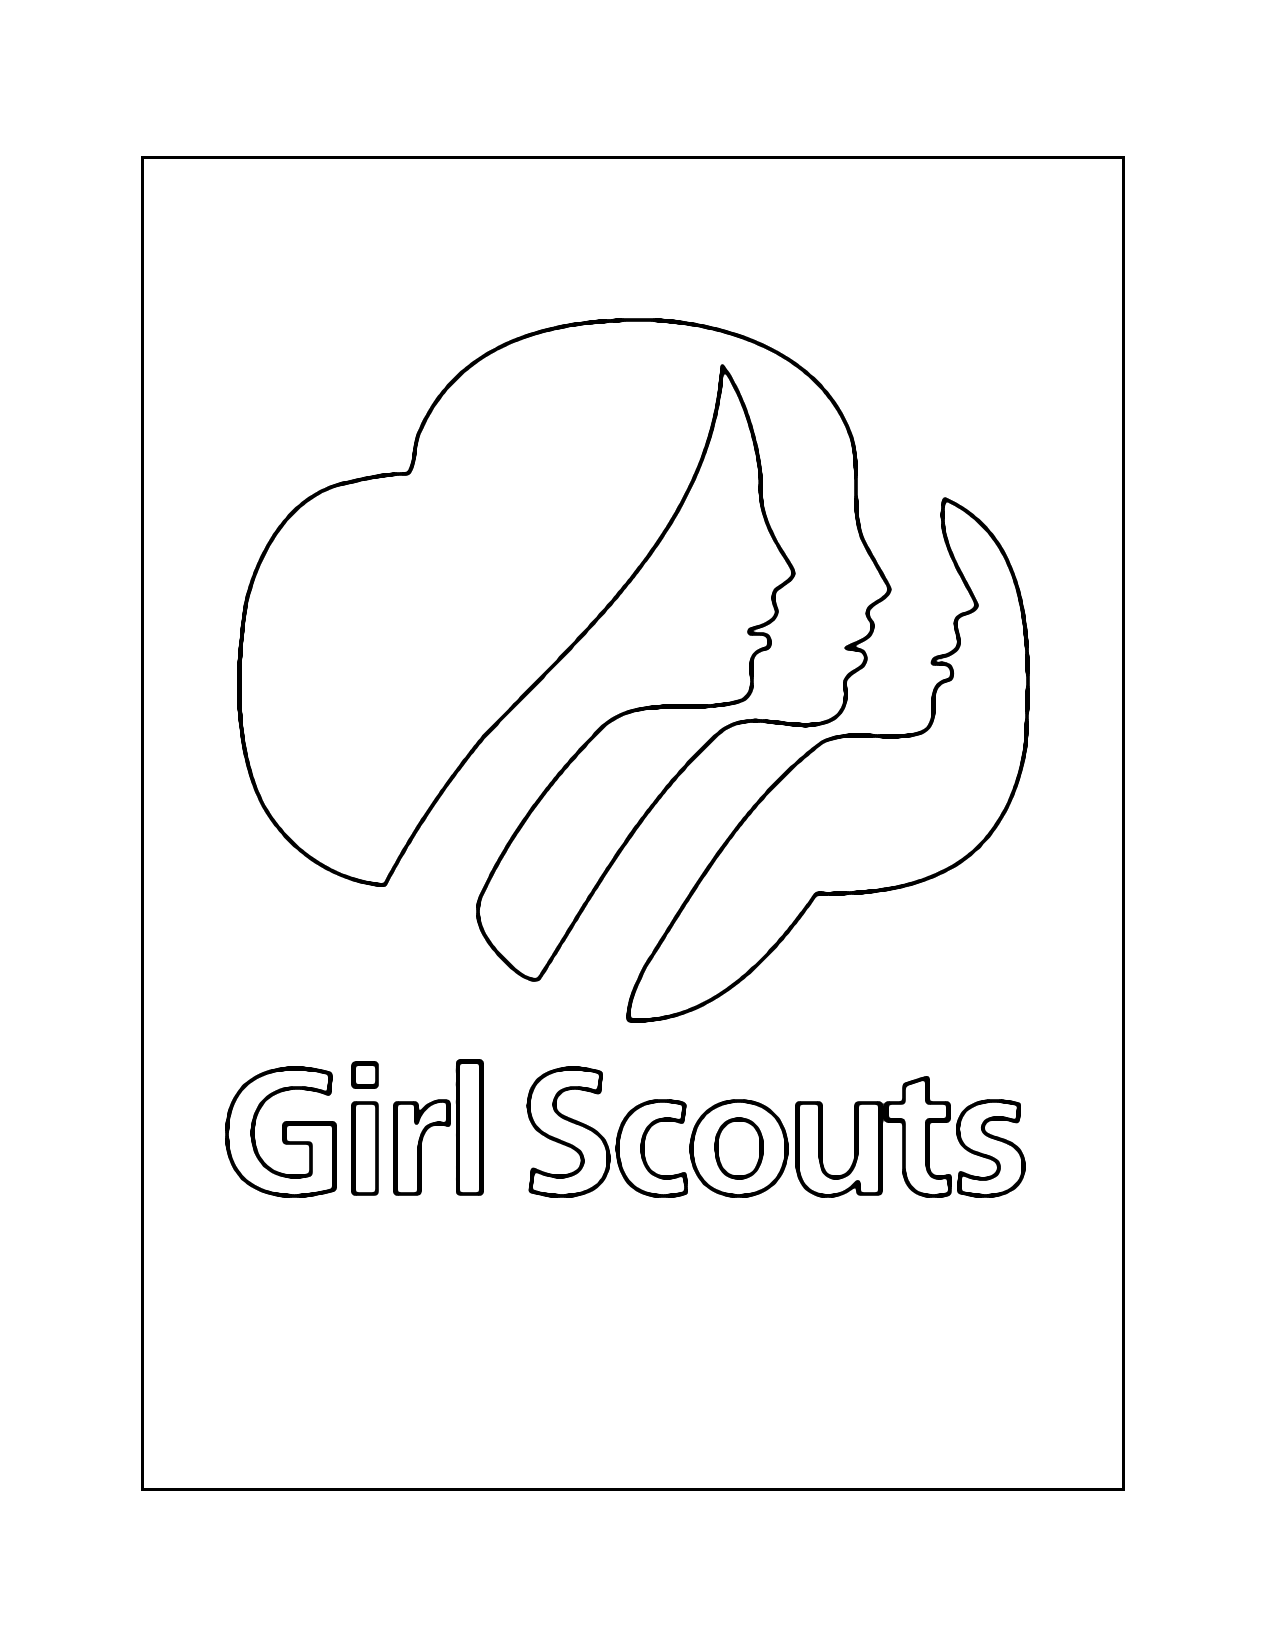 Girl Scouts Coloring Pages